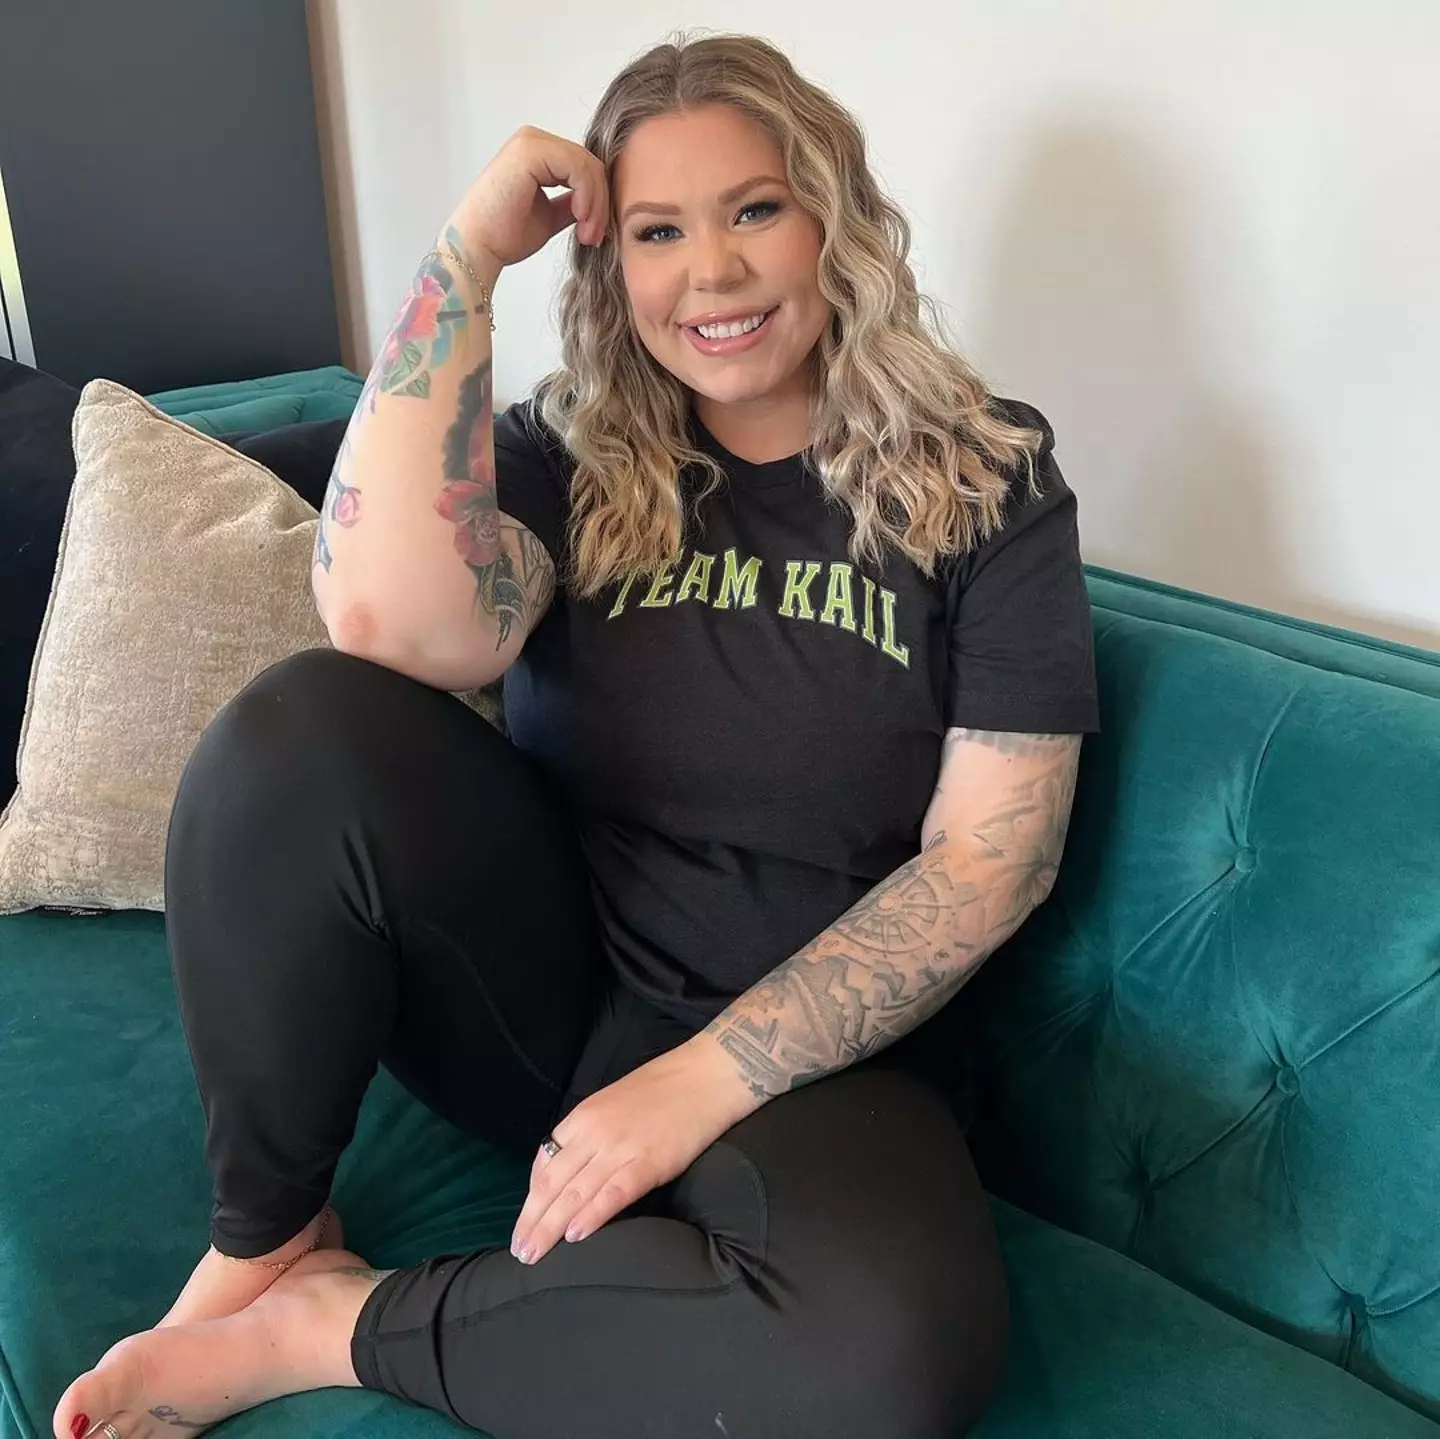 Kailyn Lowry has revealed that she has welcomed her fifth child.